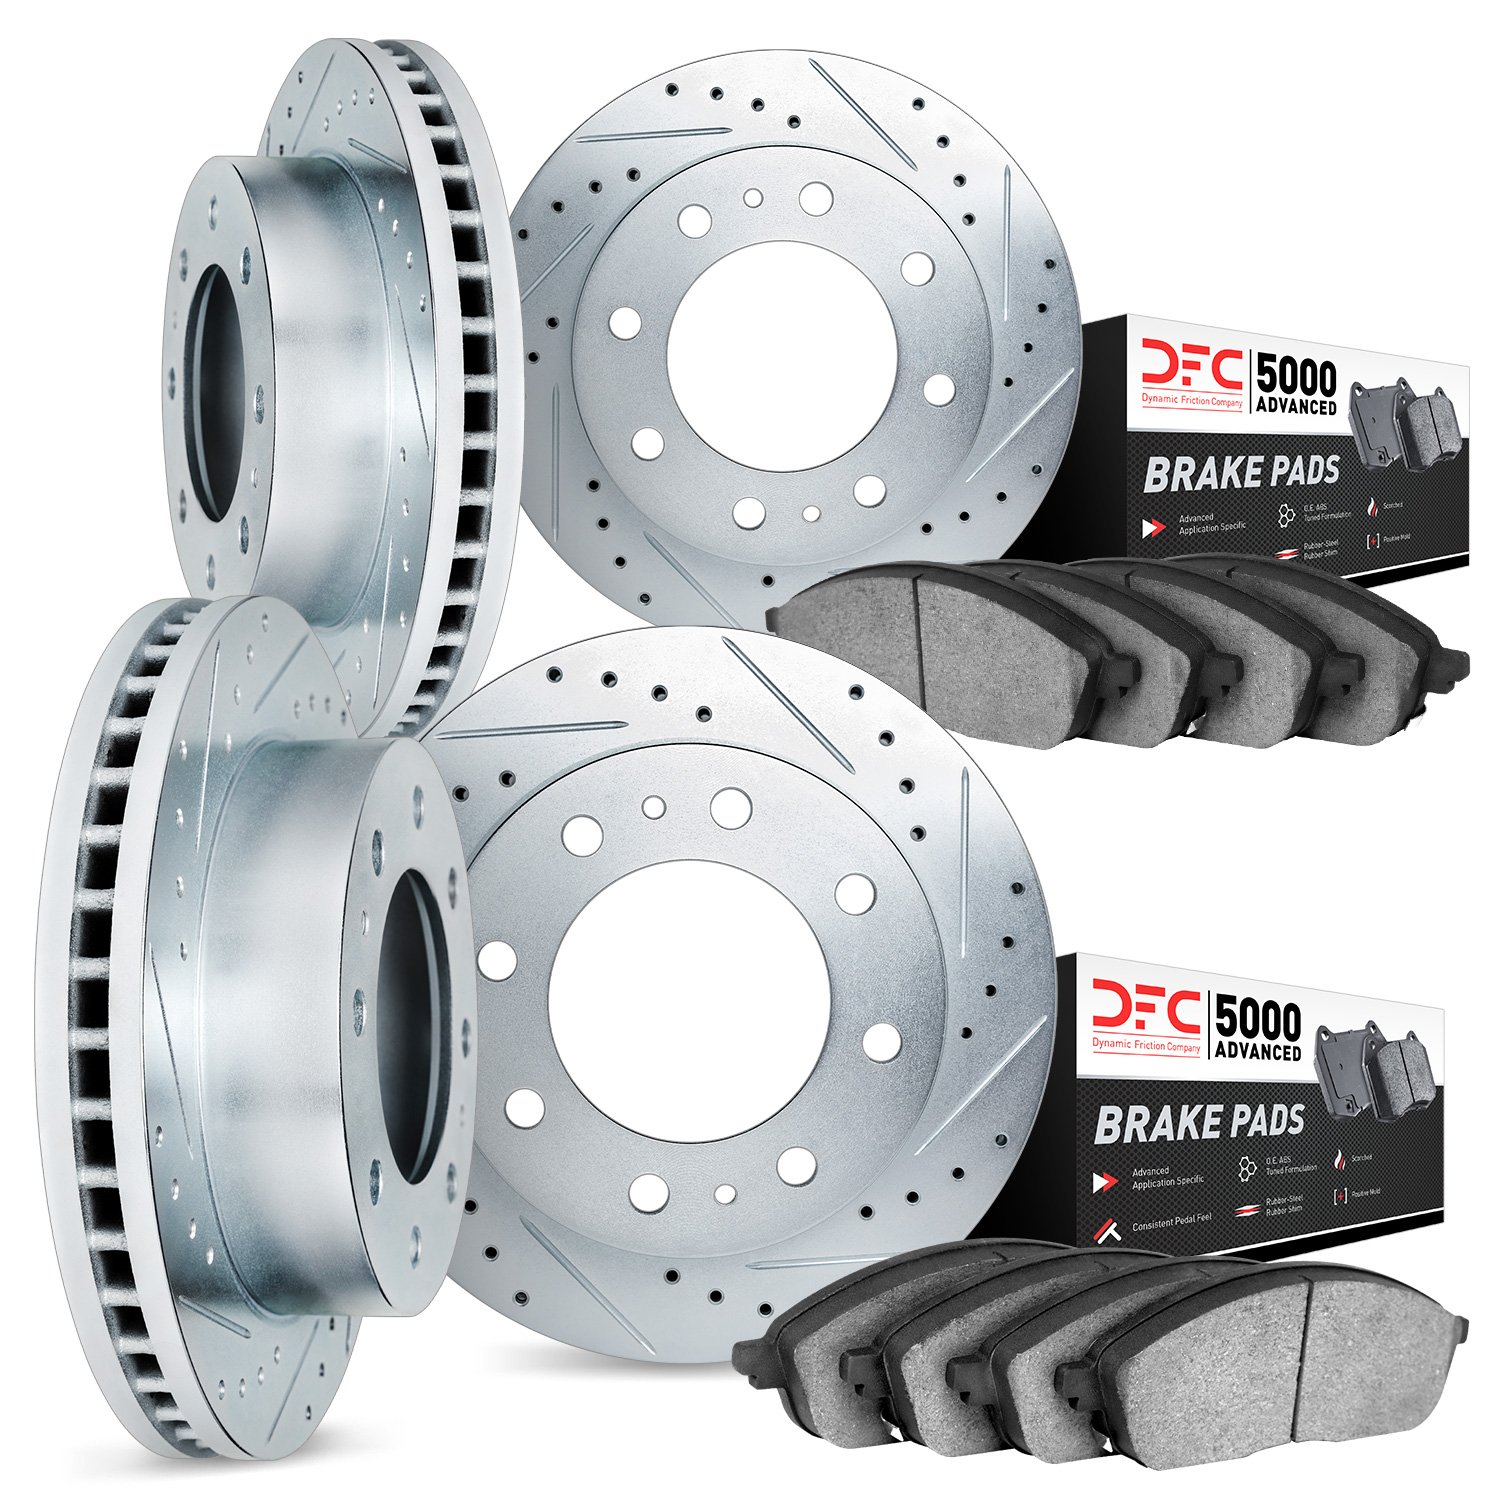 7504-40250 Drilled/Slotted Brake Rotors w/5000 Advanced Brake Pads Kit [Silver], Fits Select Mopar, Position: Front and Rear